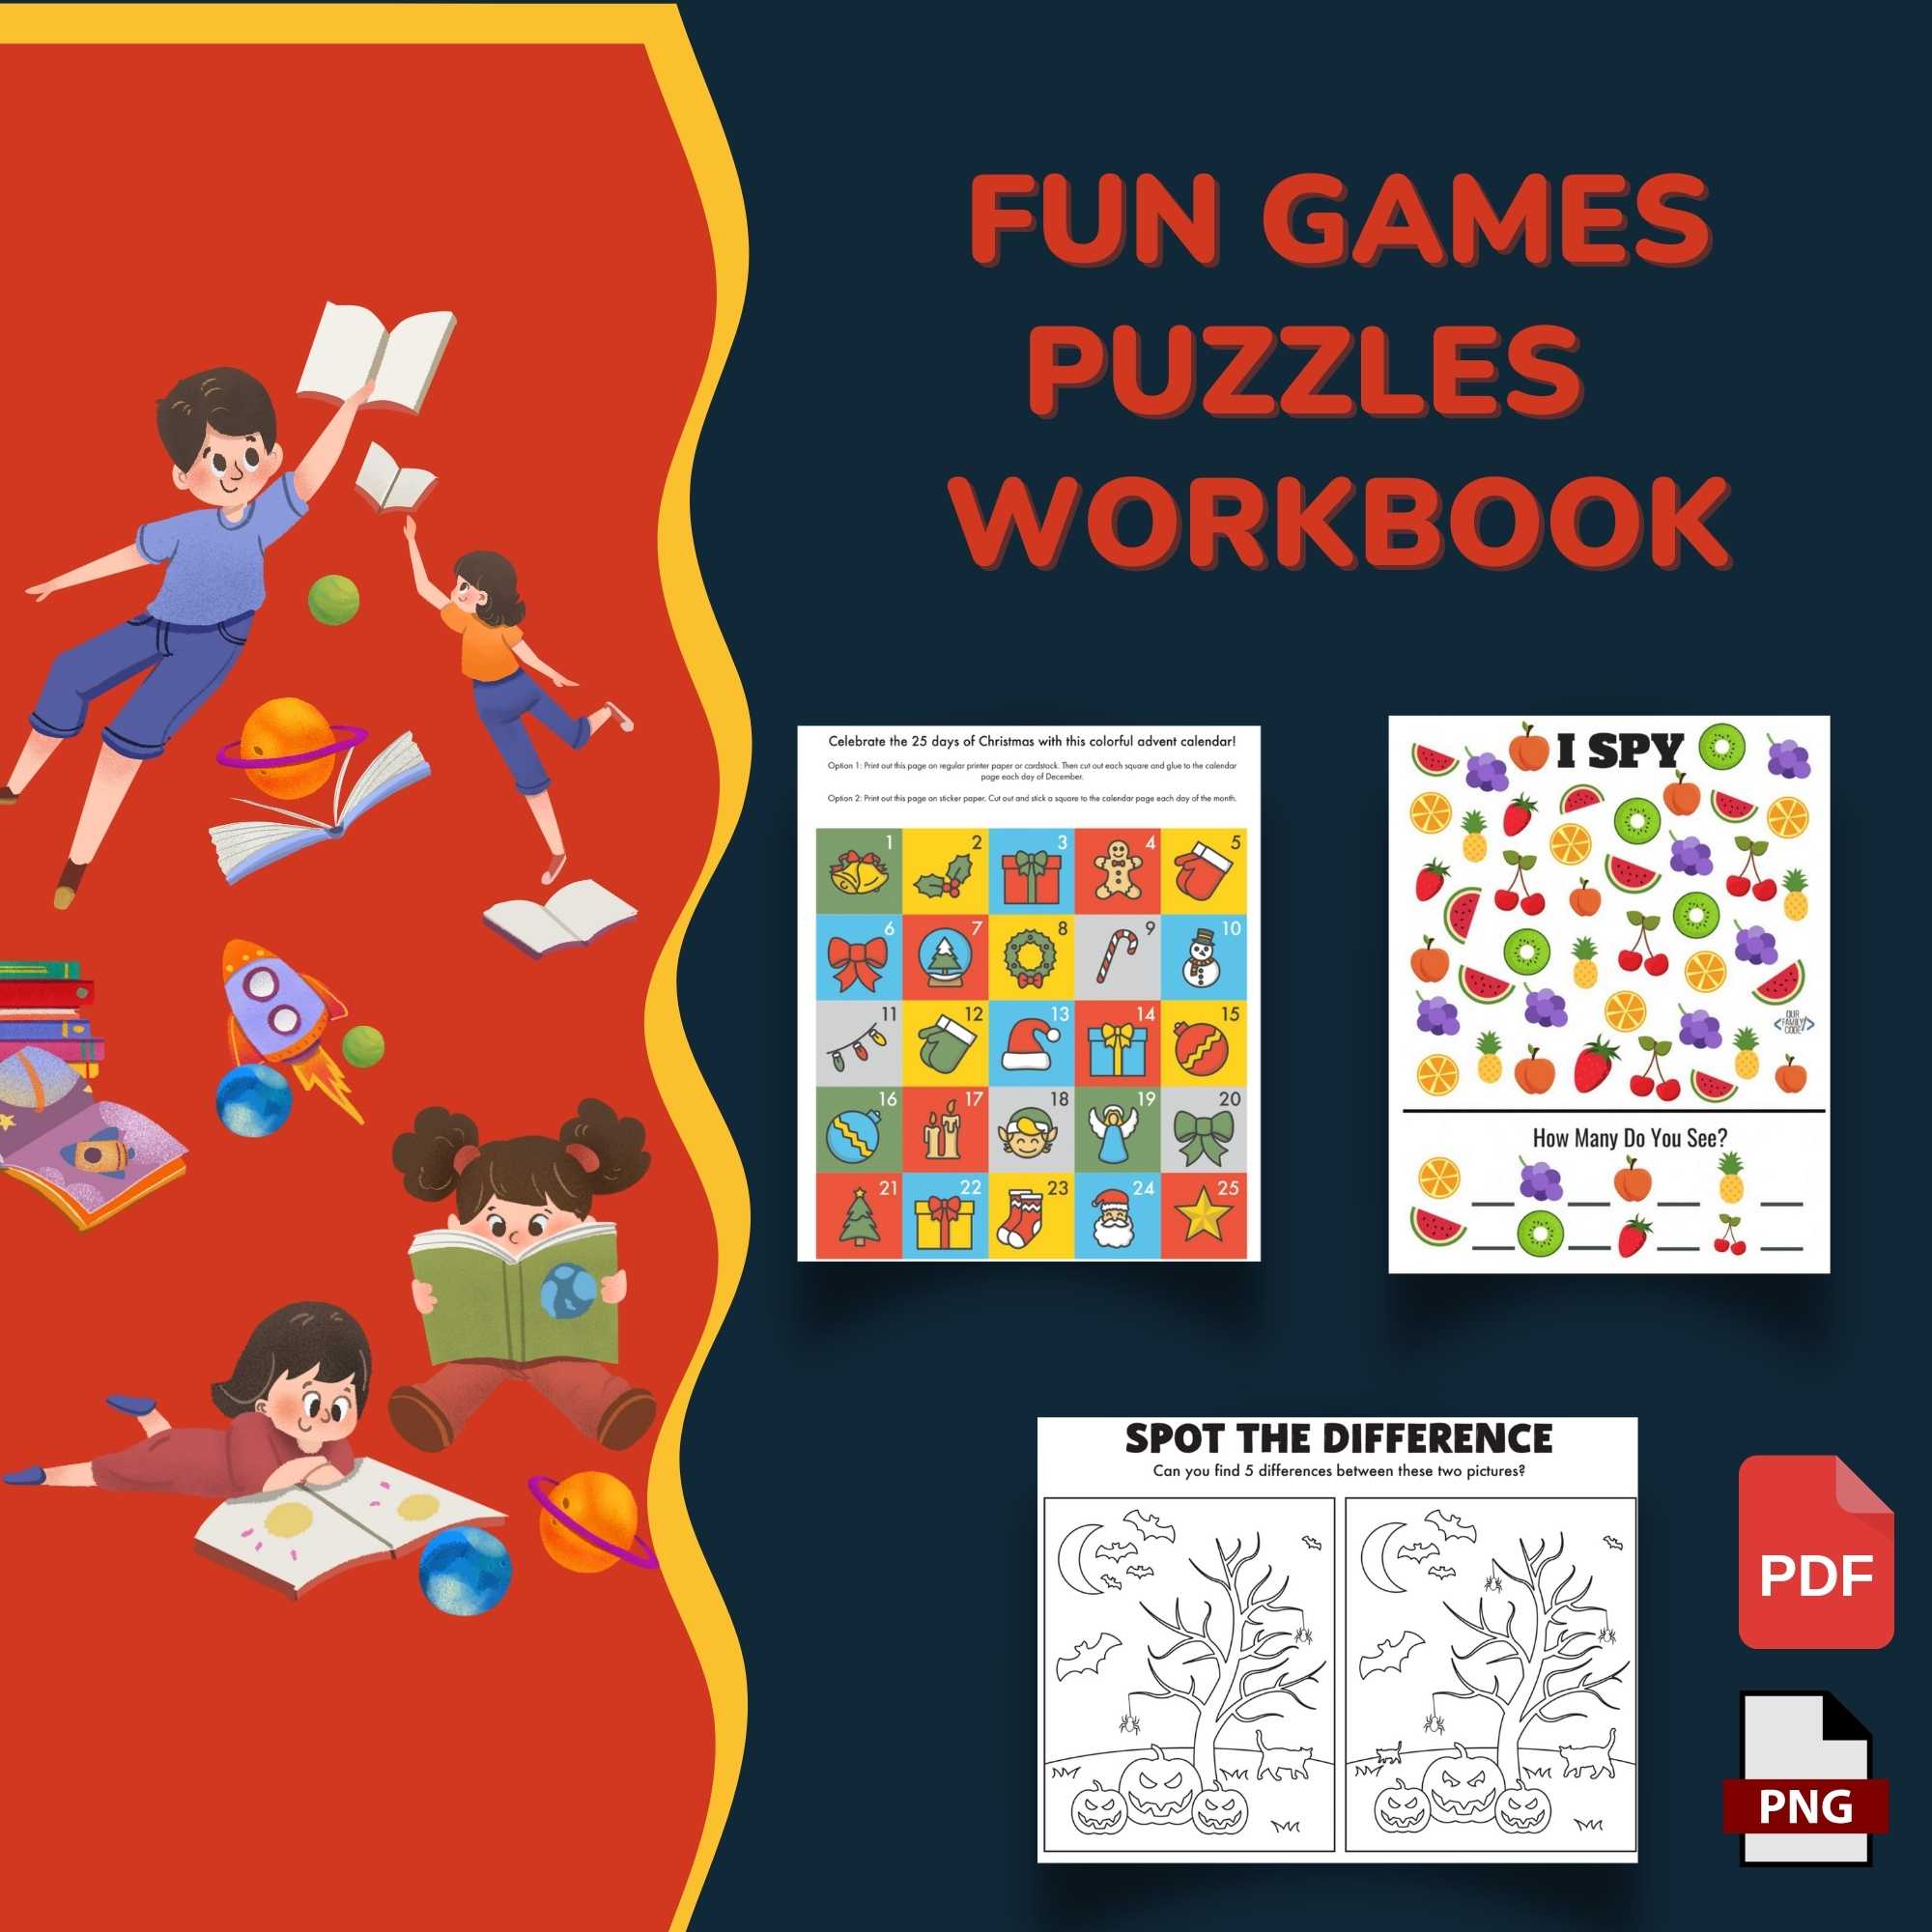 Fun End of Year Activities Games Puzzles Workbook cover image.